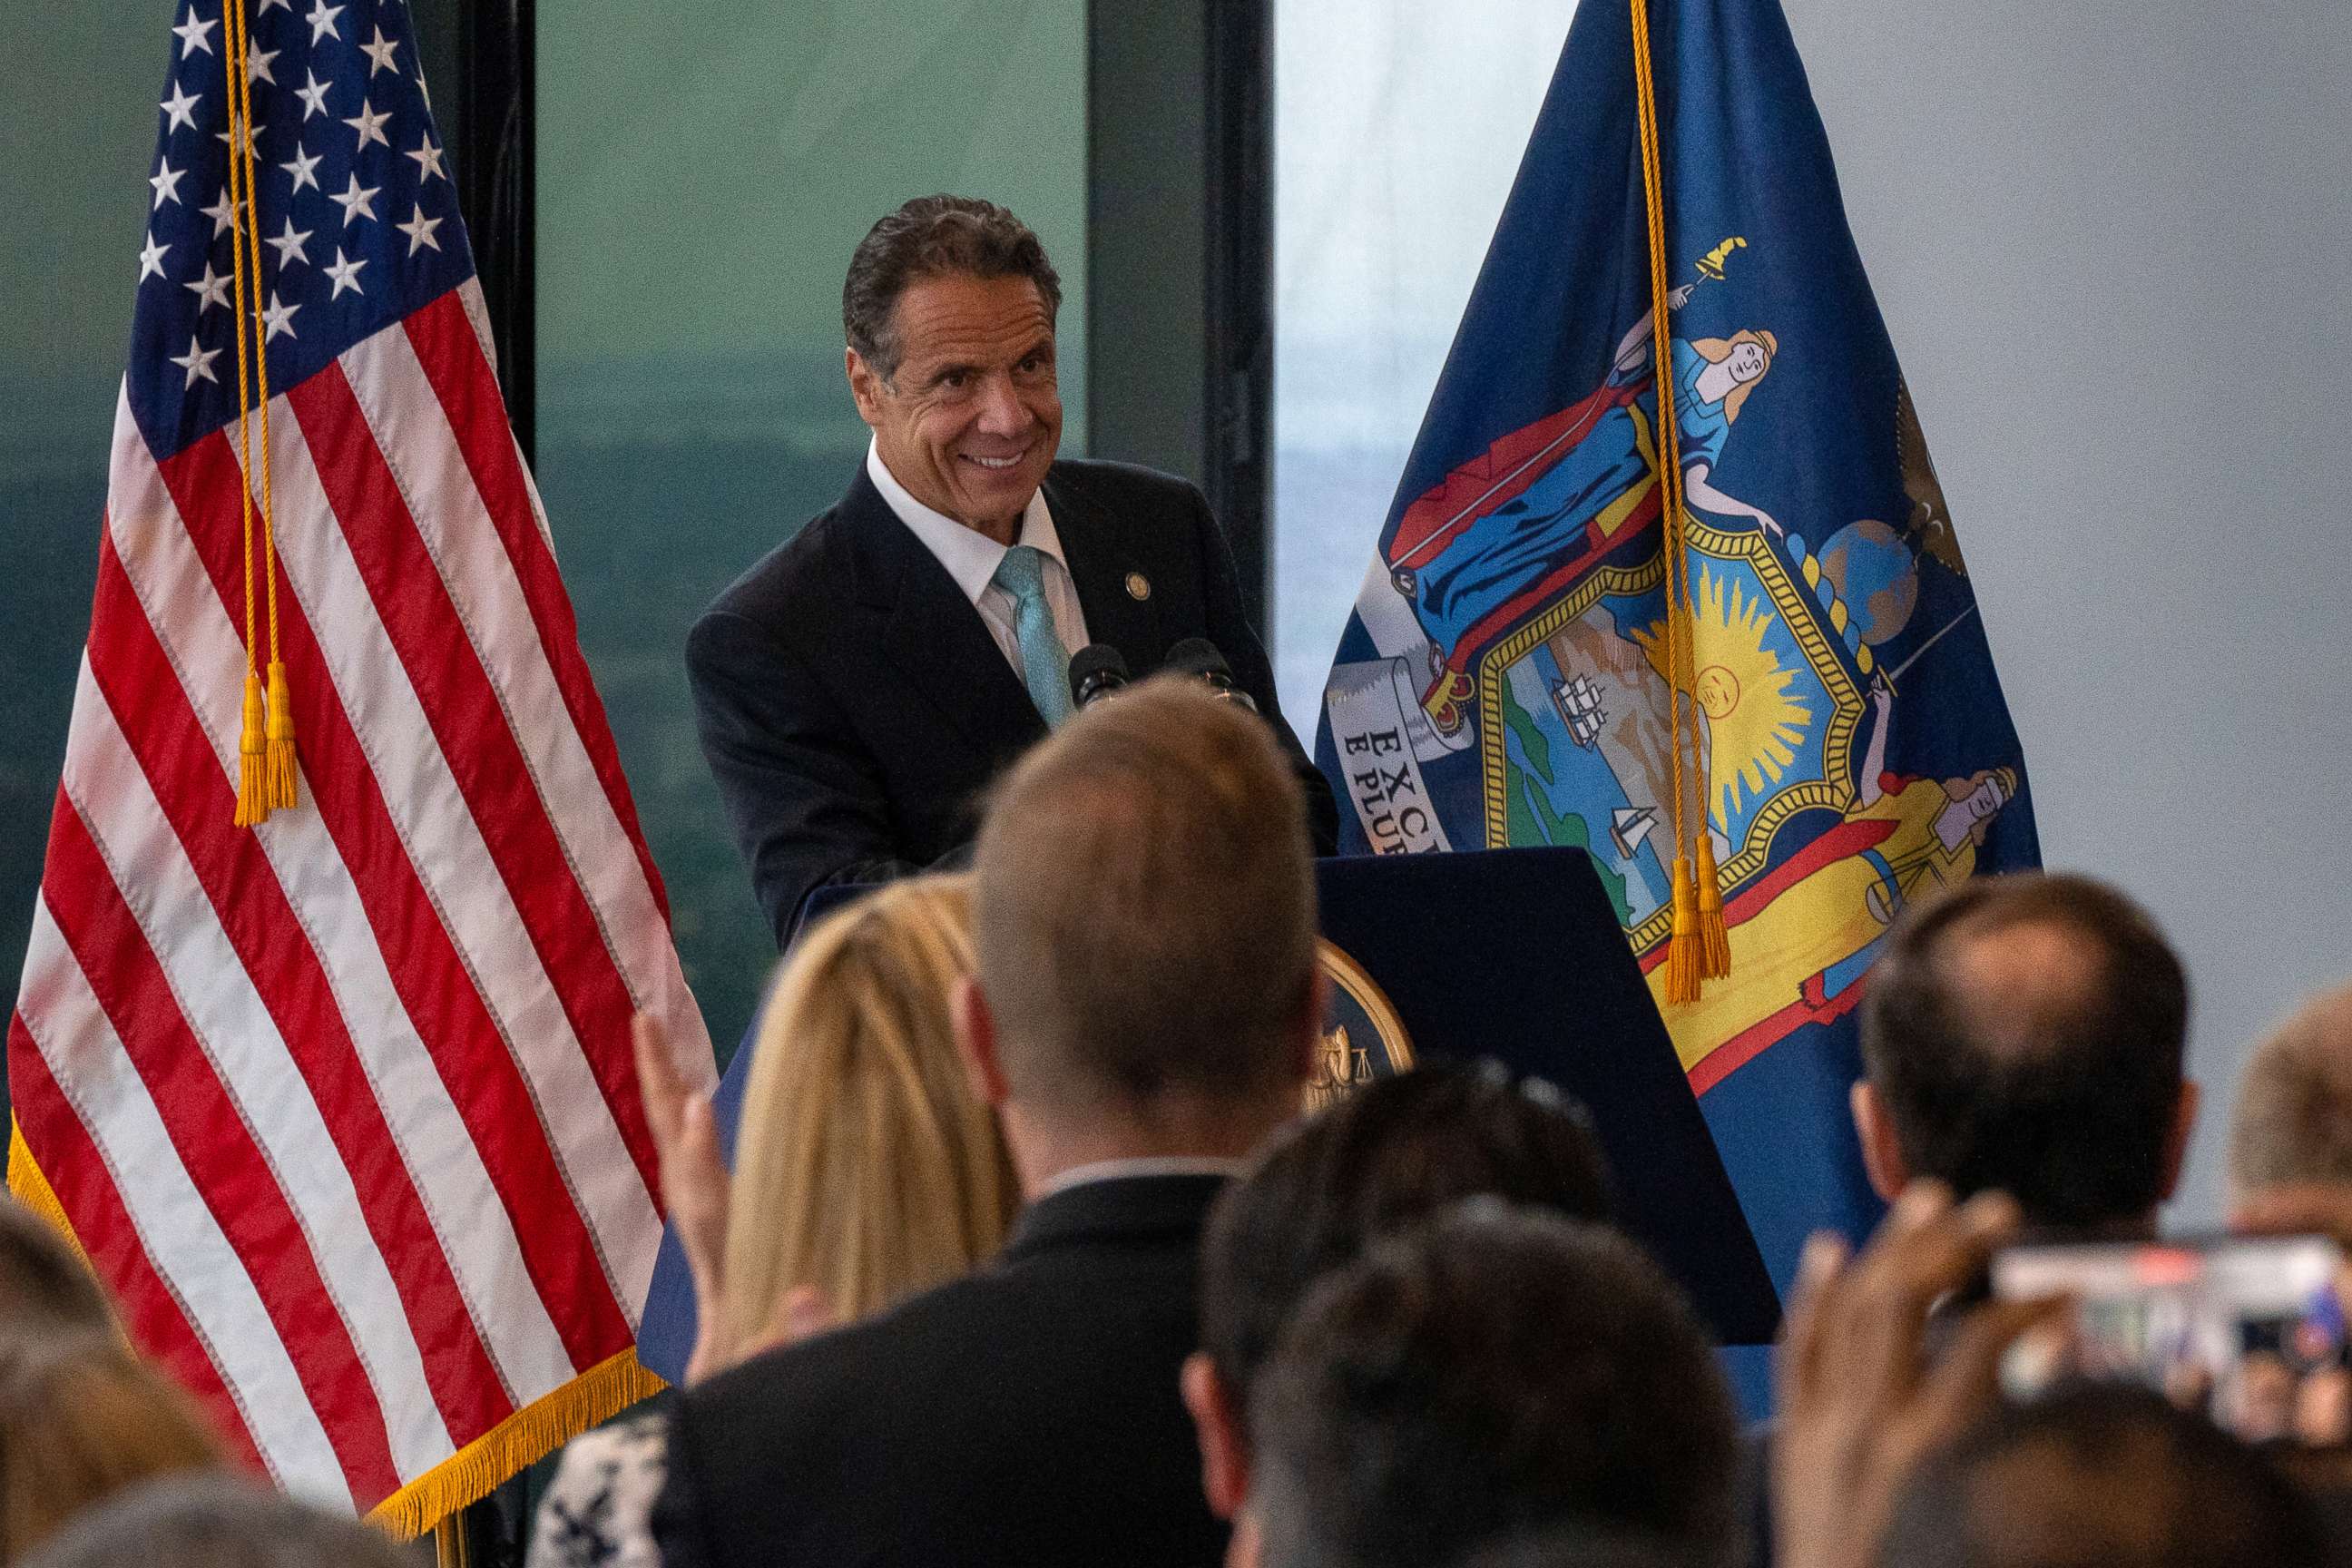 PHOTO: New York Gov. Andrew Cuomo speaks during a press conference at One World Trade Center, June 15, 2021, in New York City.